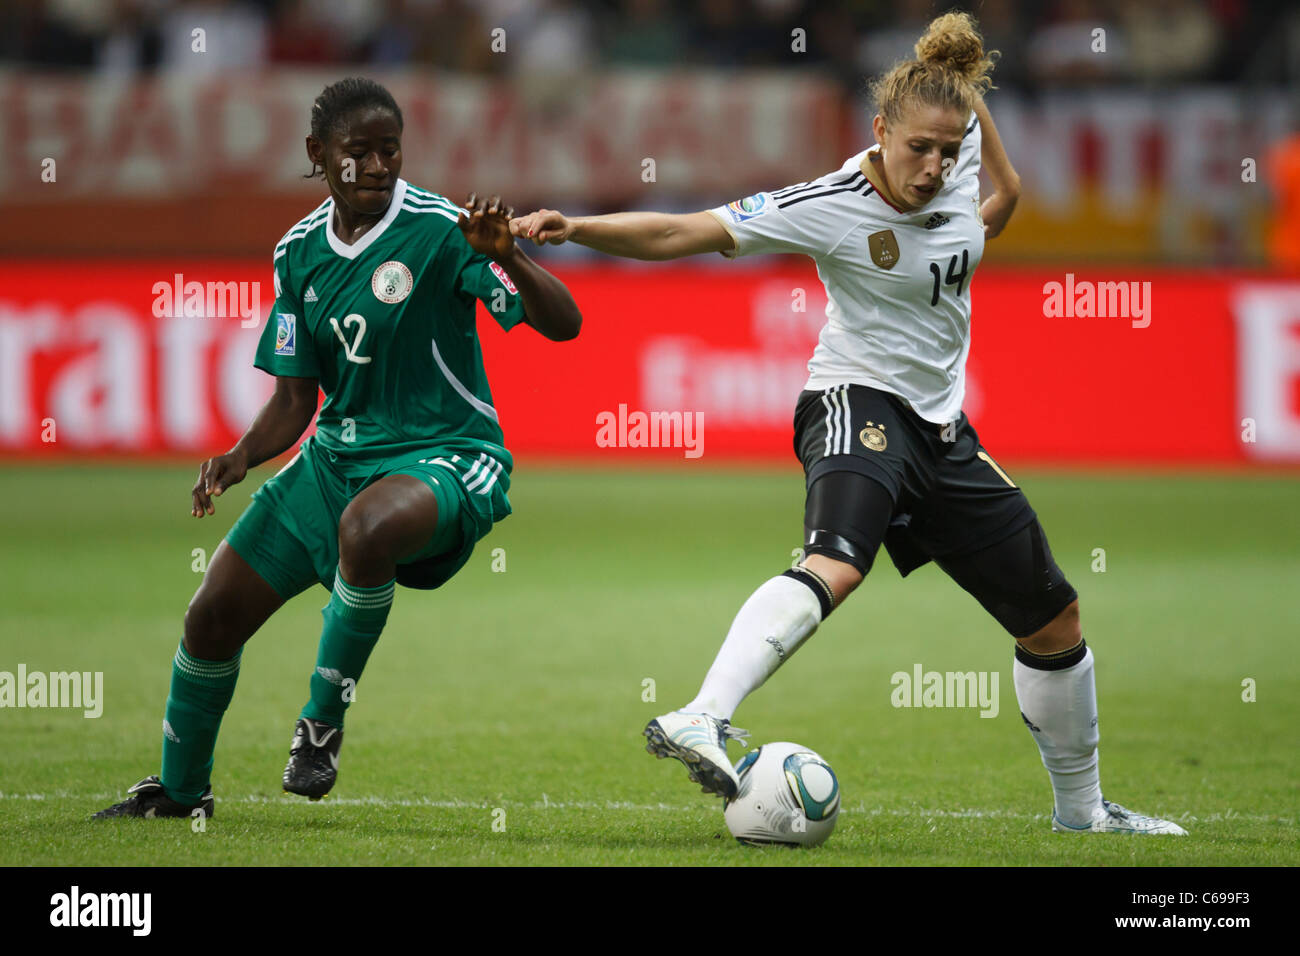 Kim Kulig of Germany (14) stretches for the ball against Sarah Michael of Nigeria (12) during a 2011 Women's World Cup match. Stock Photo